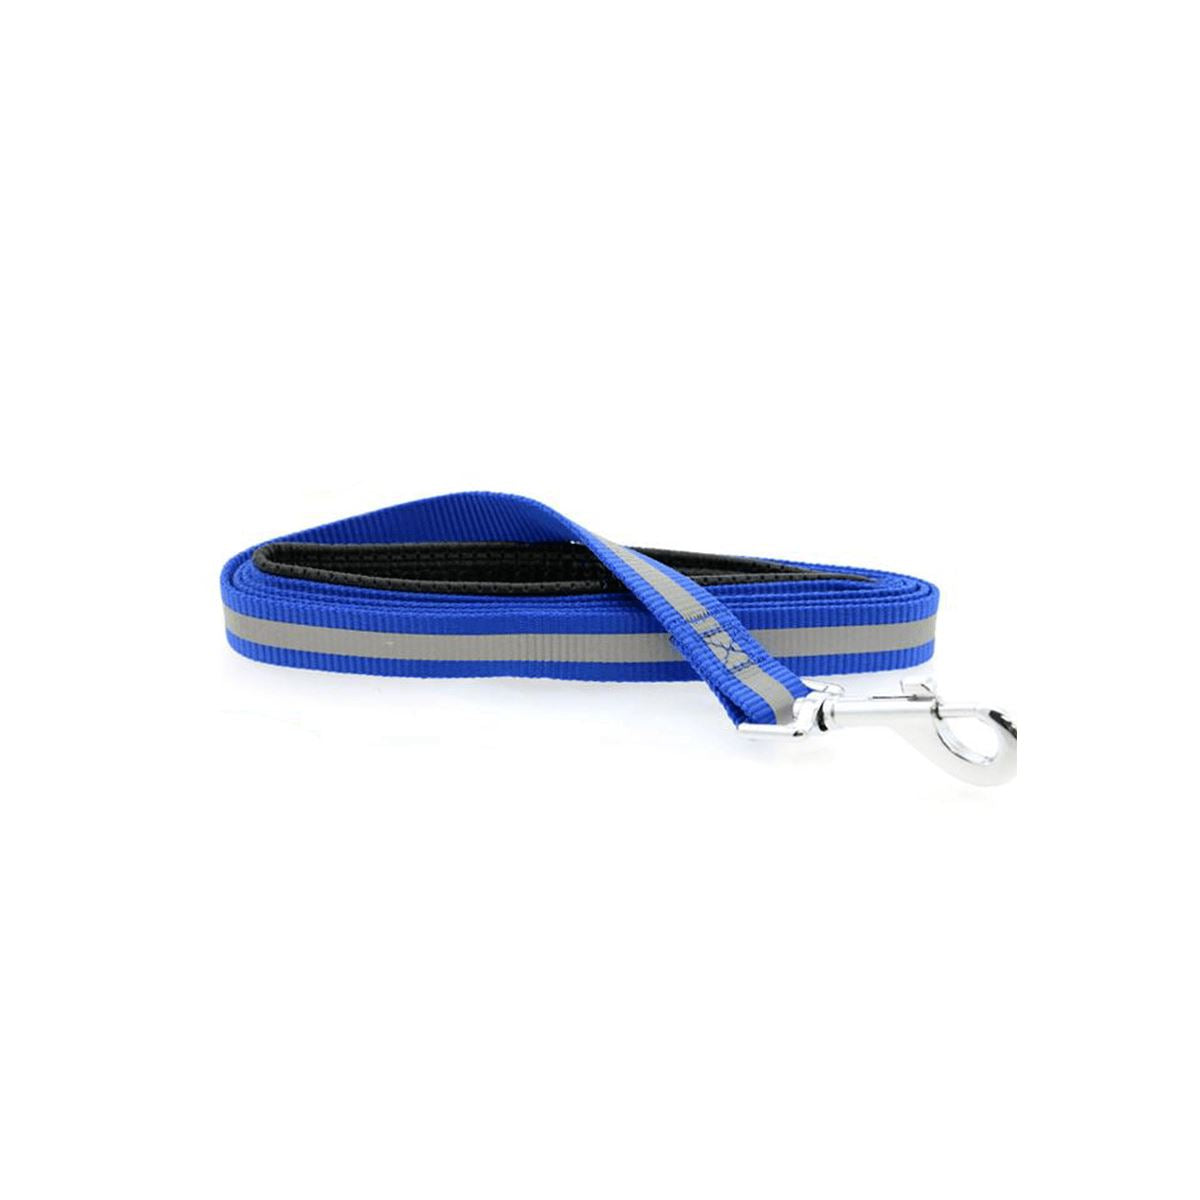 Reflective Nylon Leash with Soft Grip Handle in Blue | Pawlicious & Company